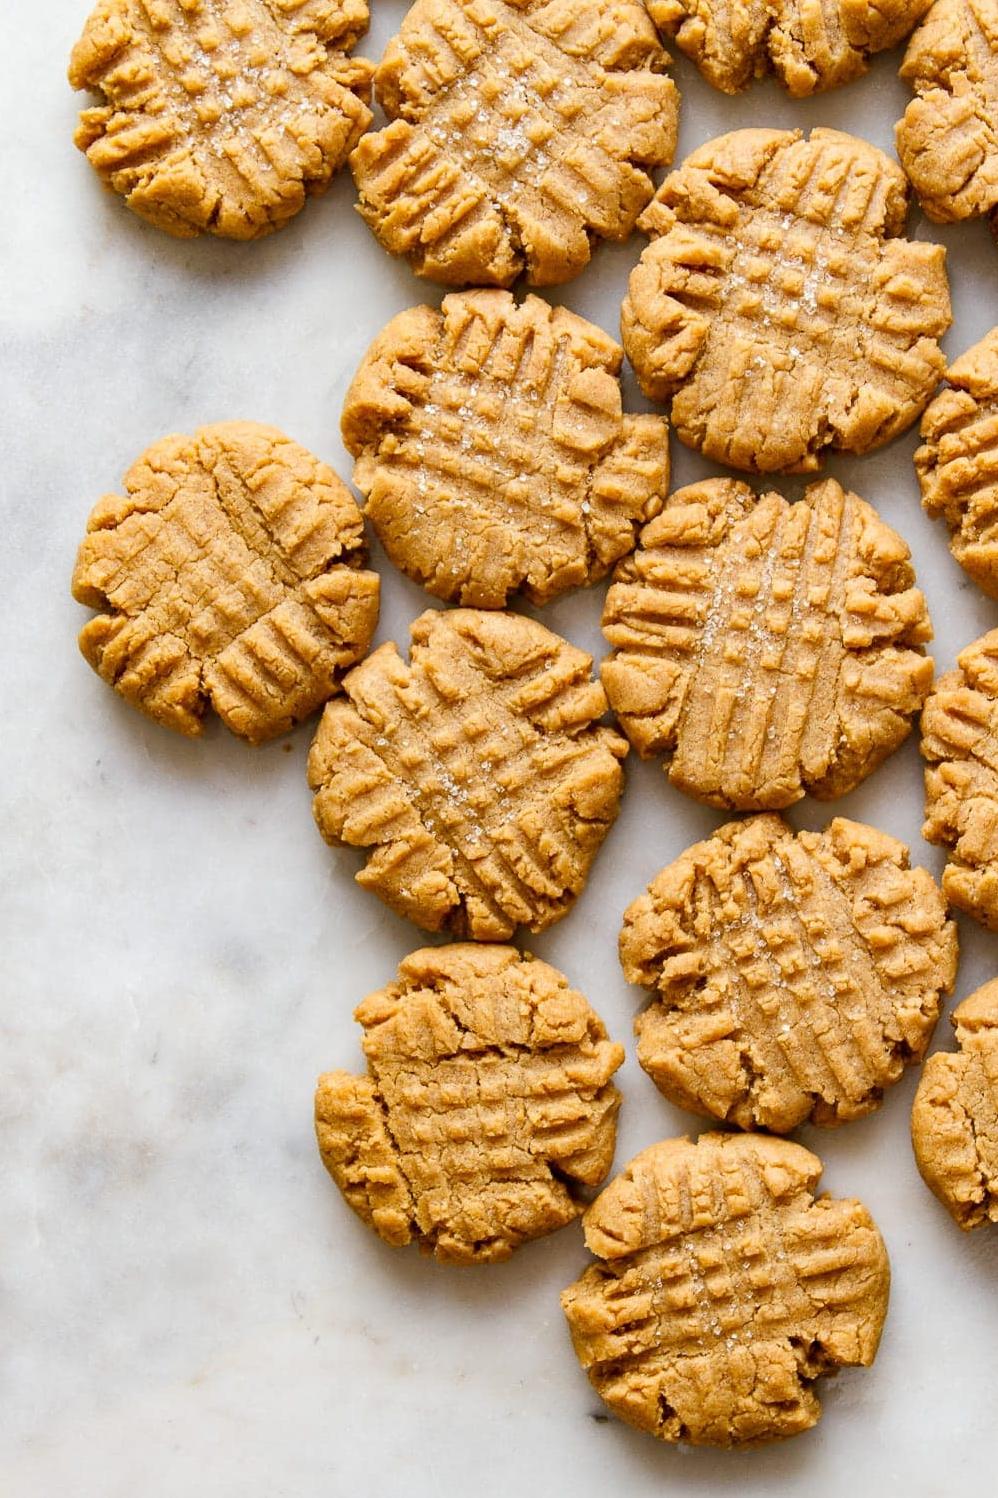  A heavenly aroma of fresh-baked peanut butter cookies wafts through the kitchen, inviting you to indulge in their scrumptiousness.